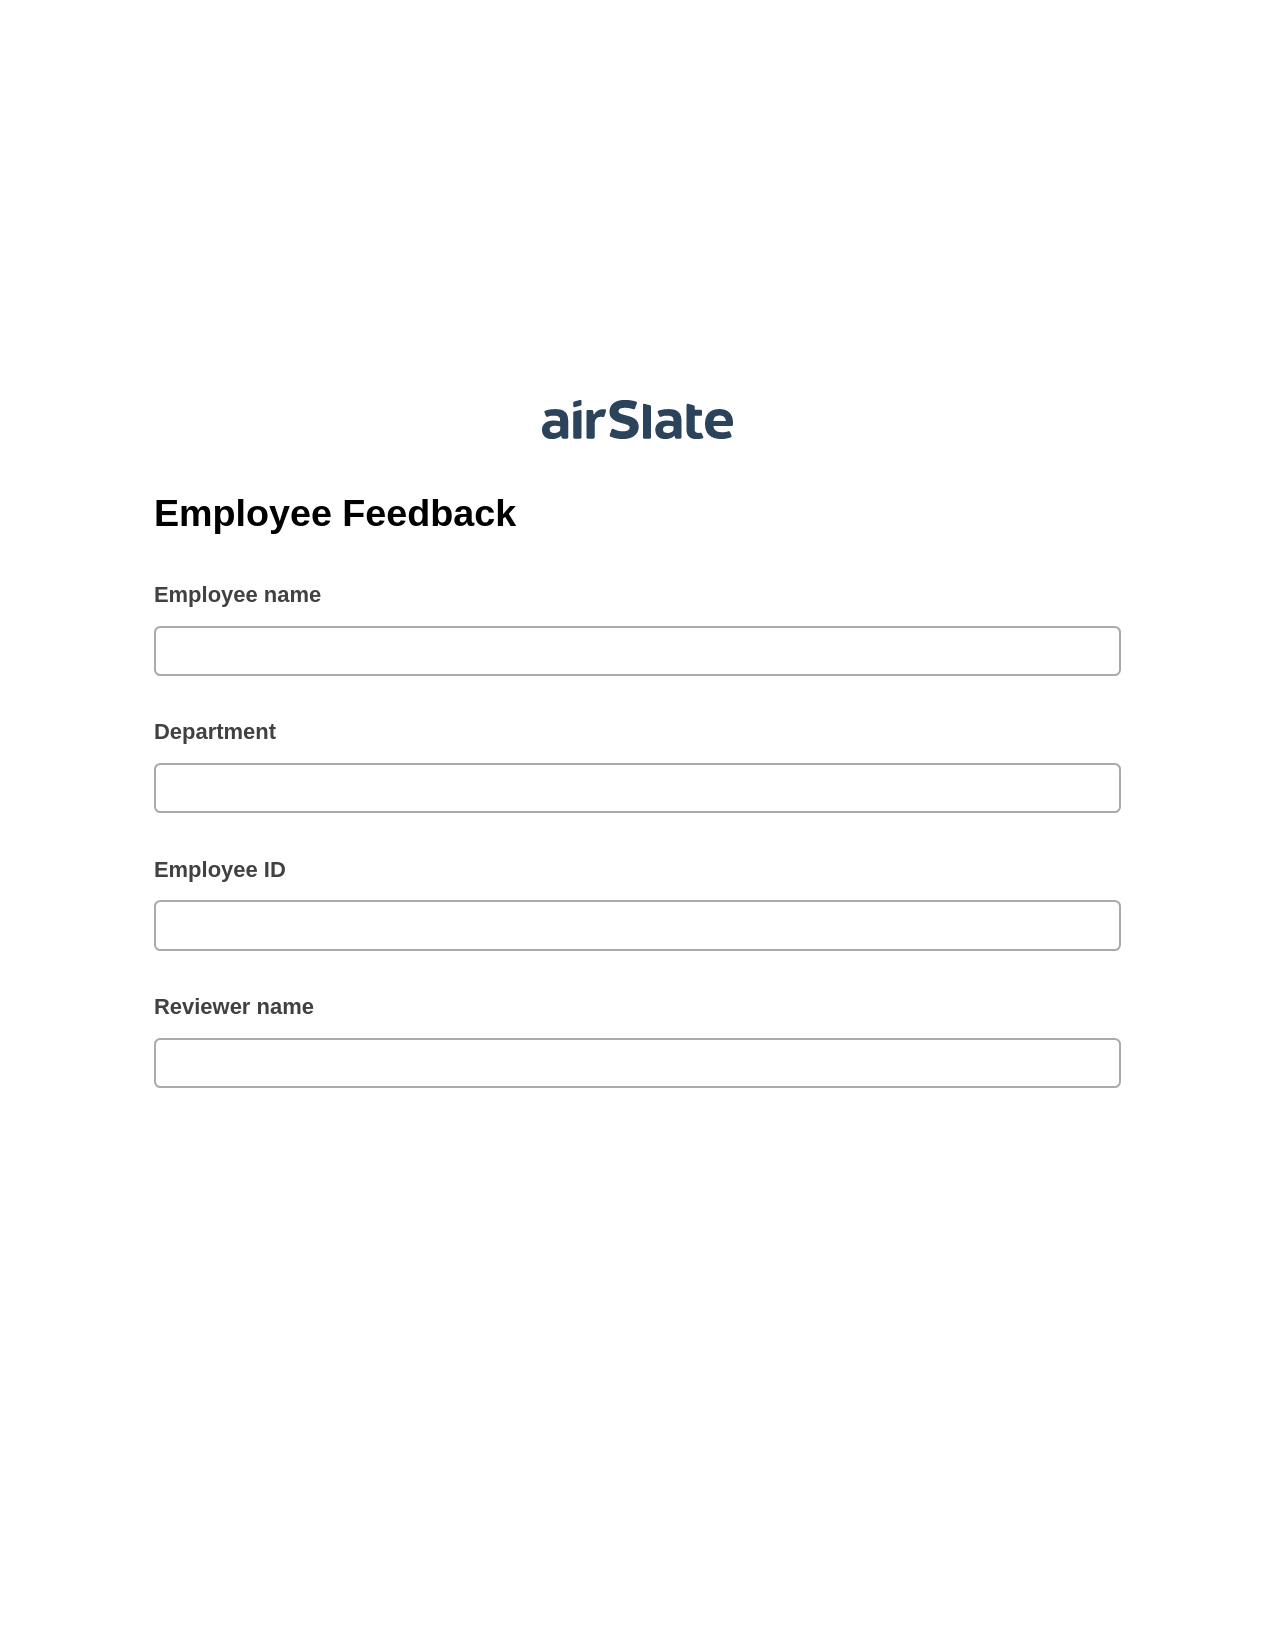 Multirole Employee Feedback Pre-fill from Google Sheet Dropdown Options Bot, Send a Slate with Roles Bot, Text Message Notification Postfinish Bot